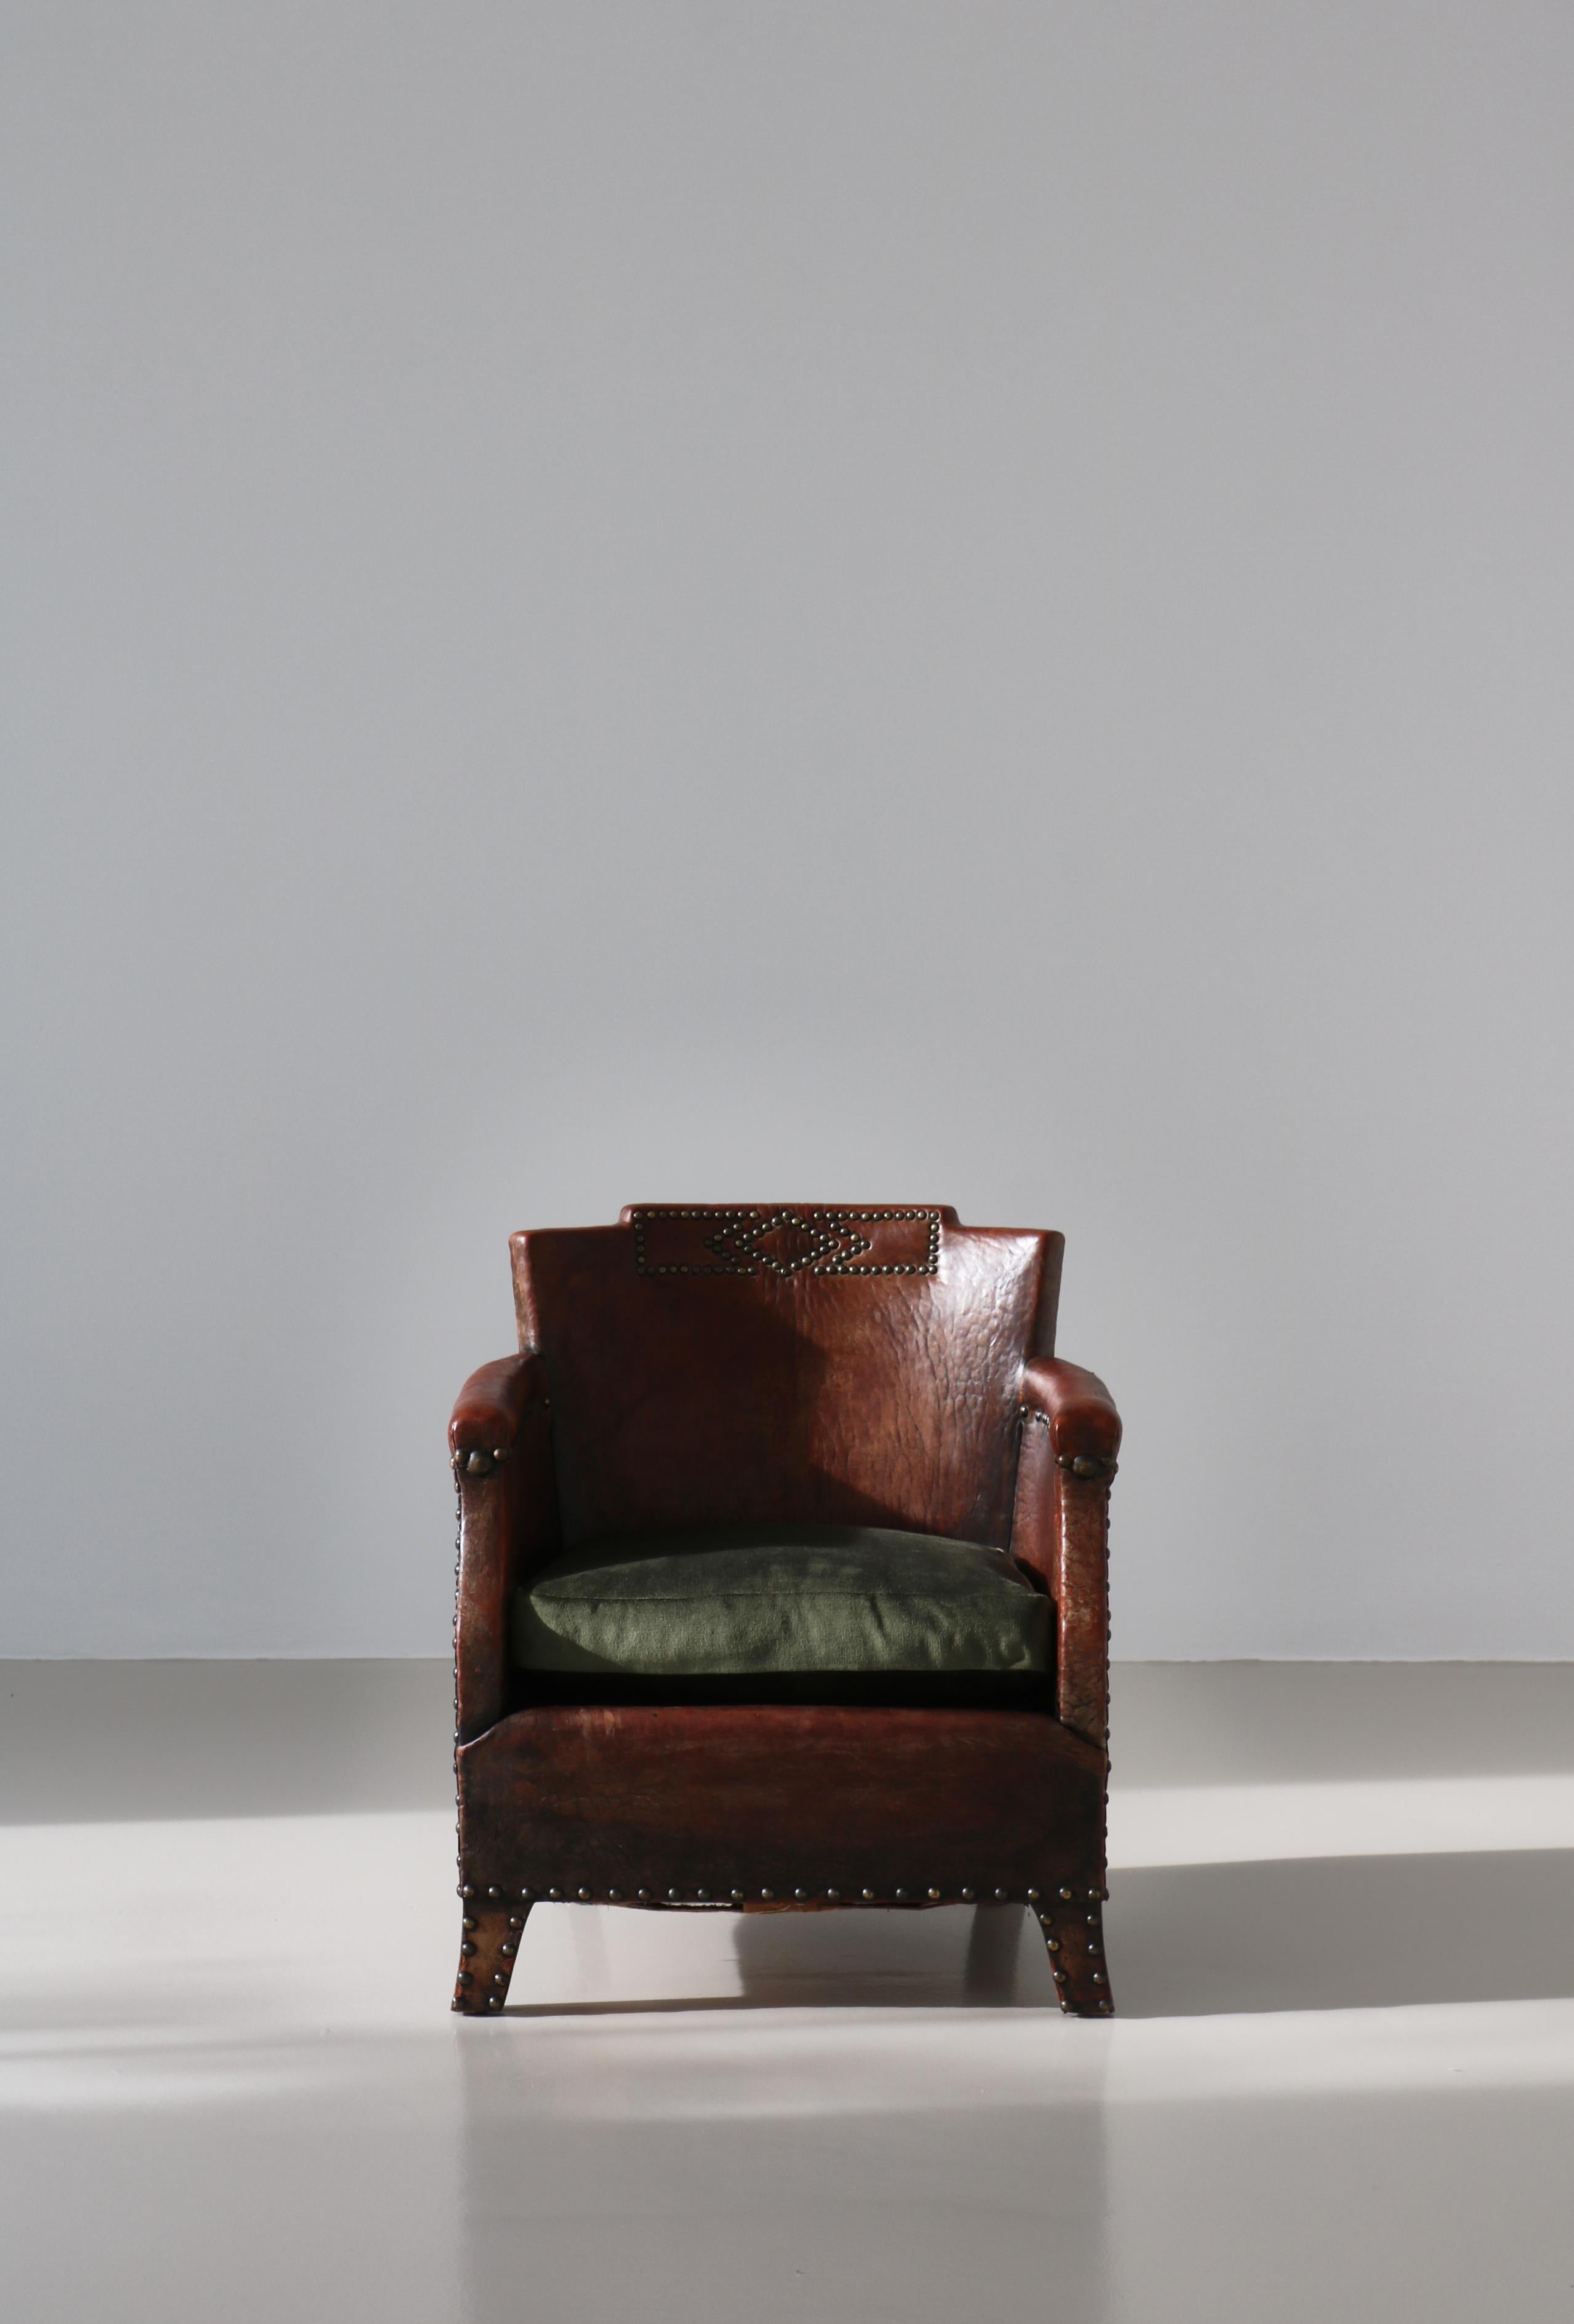 Stunning Swedish Grace lounge chair in original upholstery by architect Otto Schulz. The original buffalo leather has the most amazing patina making this a very unique piece. This small club chair is very much art deco with exemplary proportions.